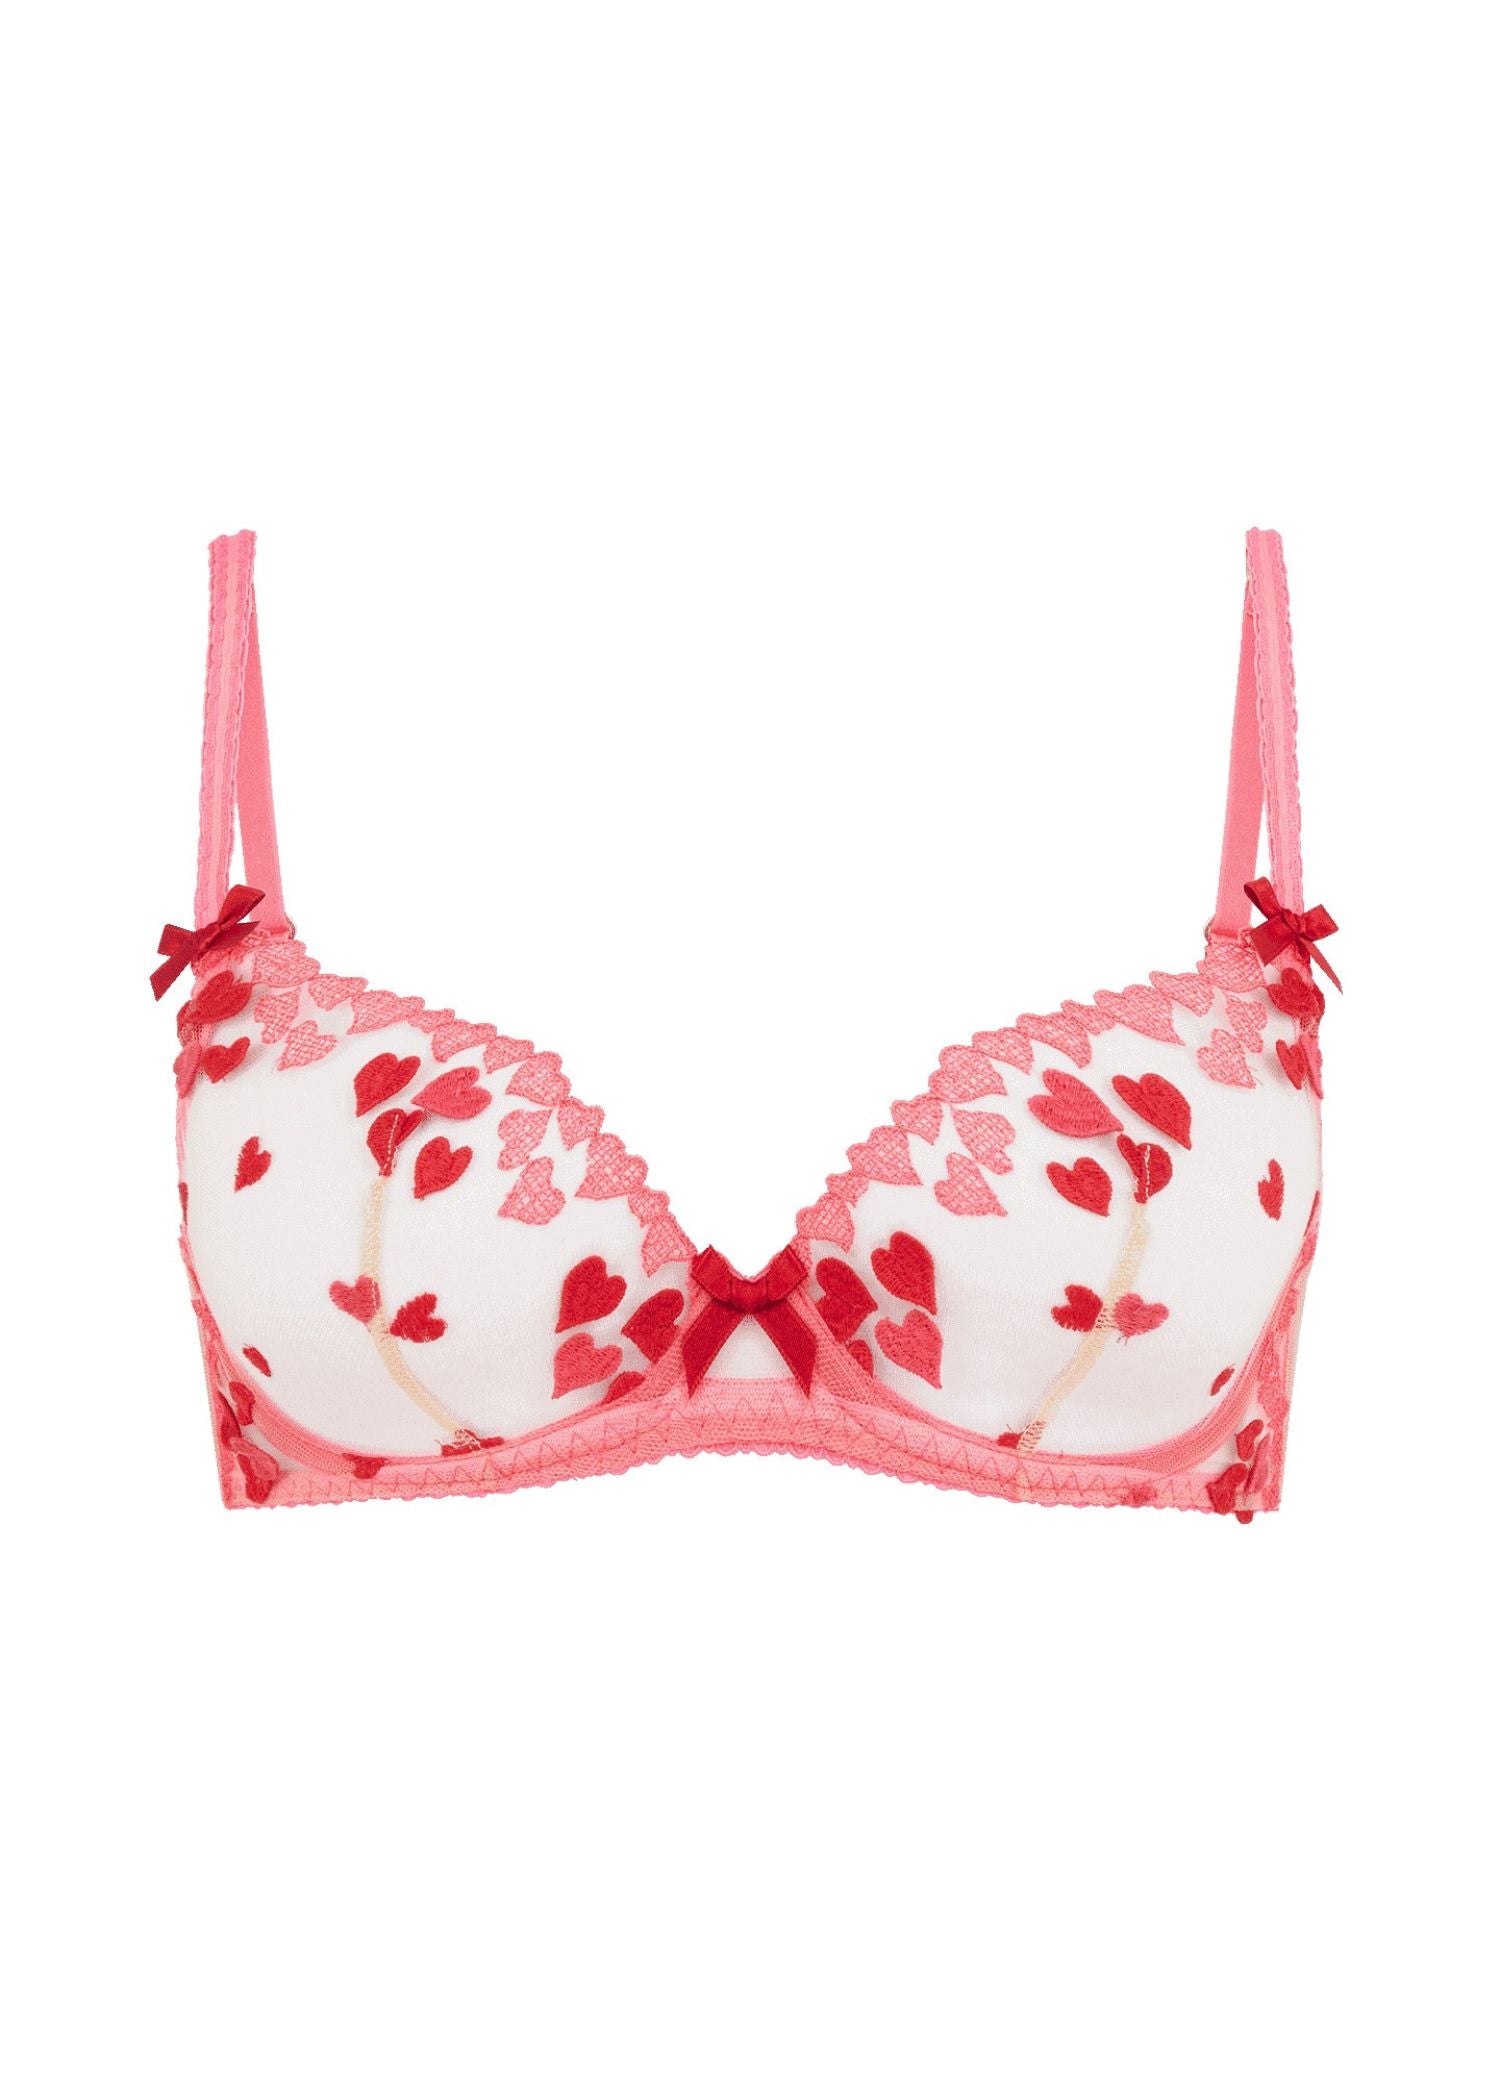 Wholesale cupid lingerie For An Irresistible Look 